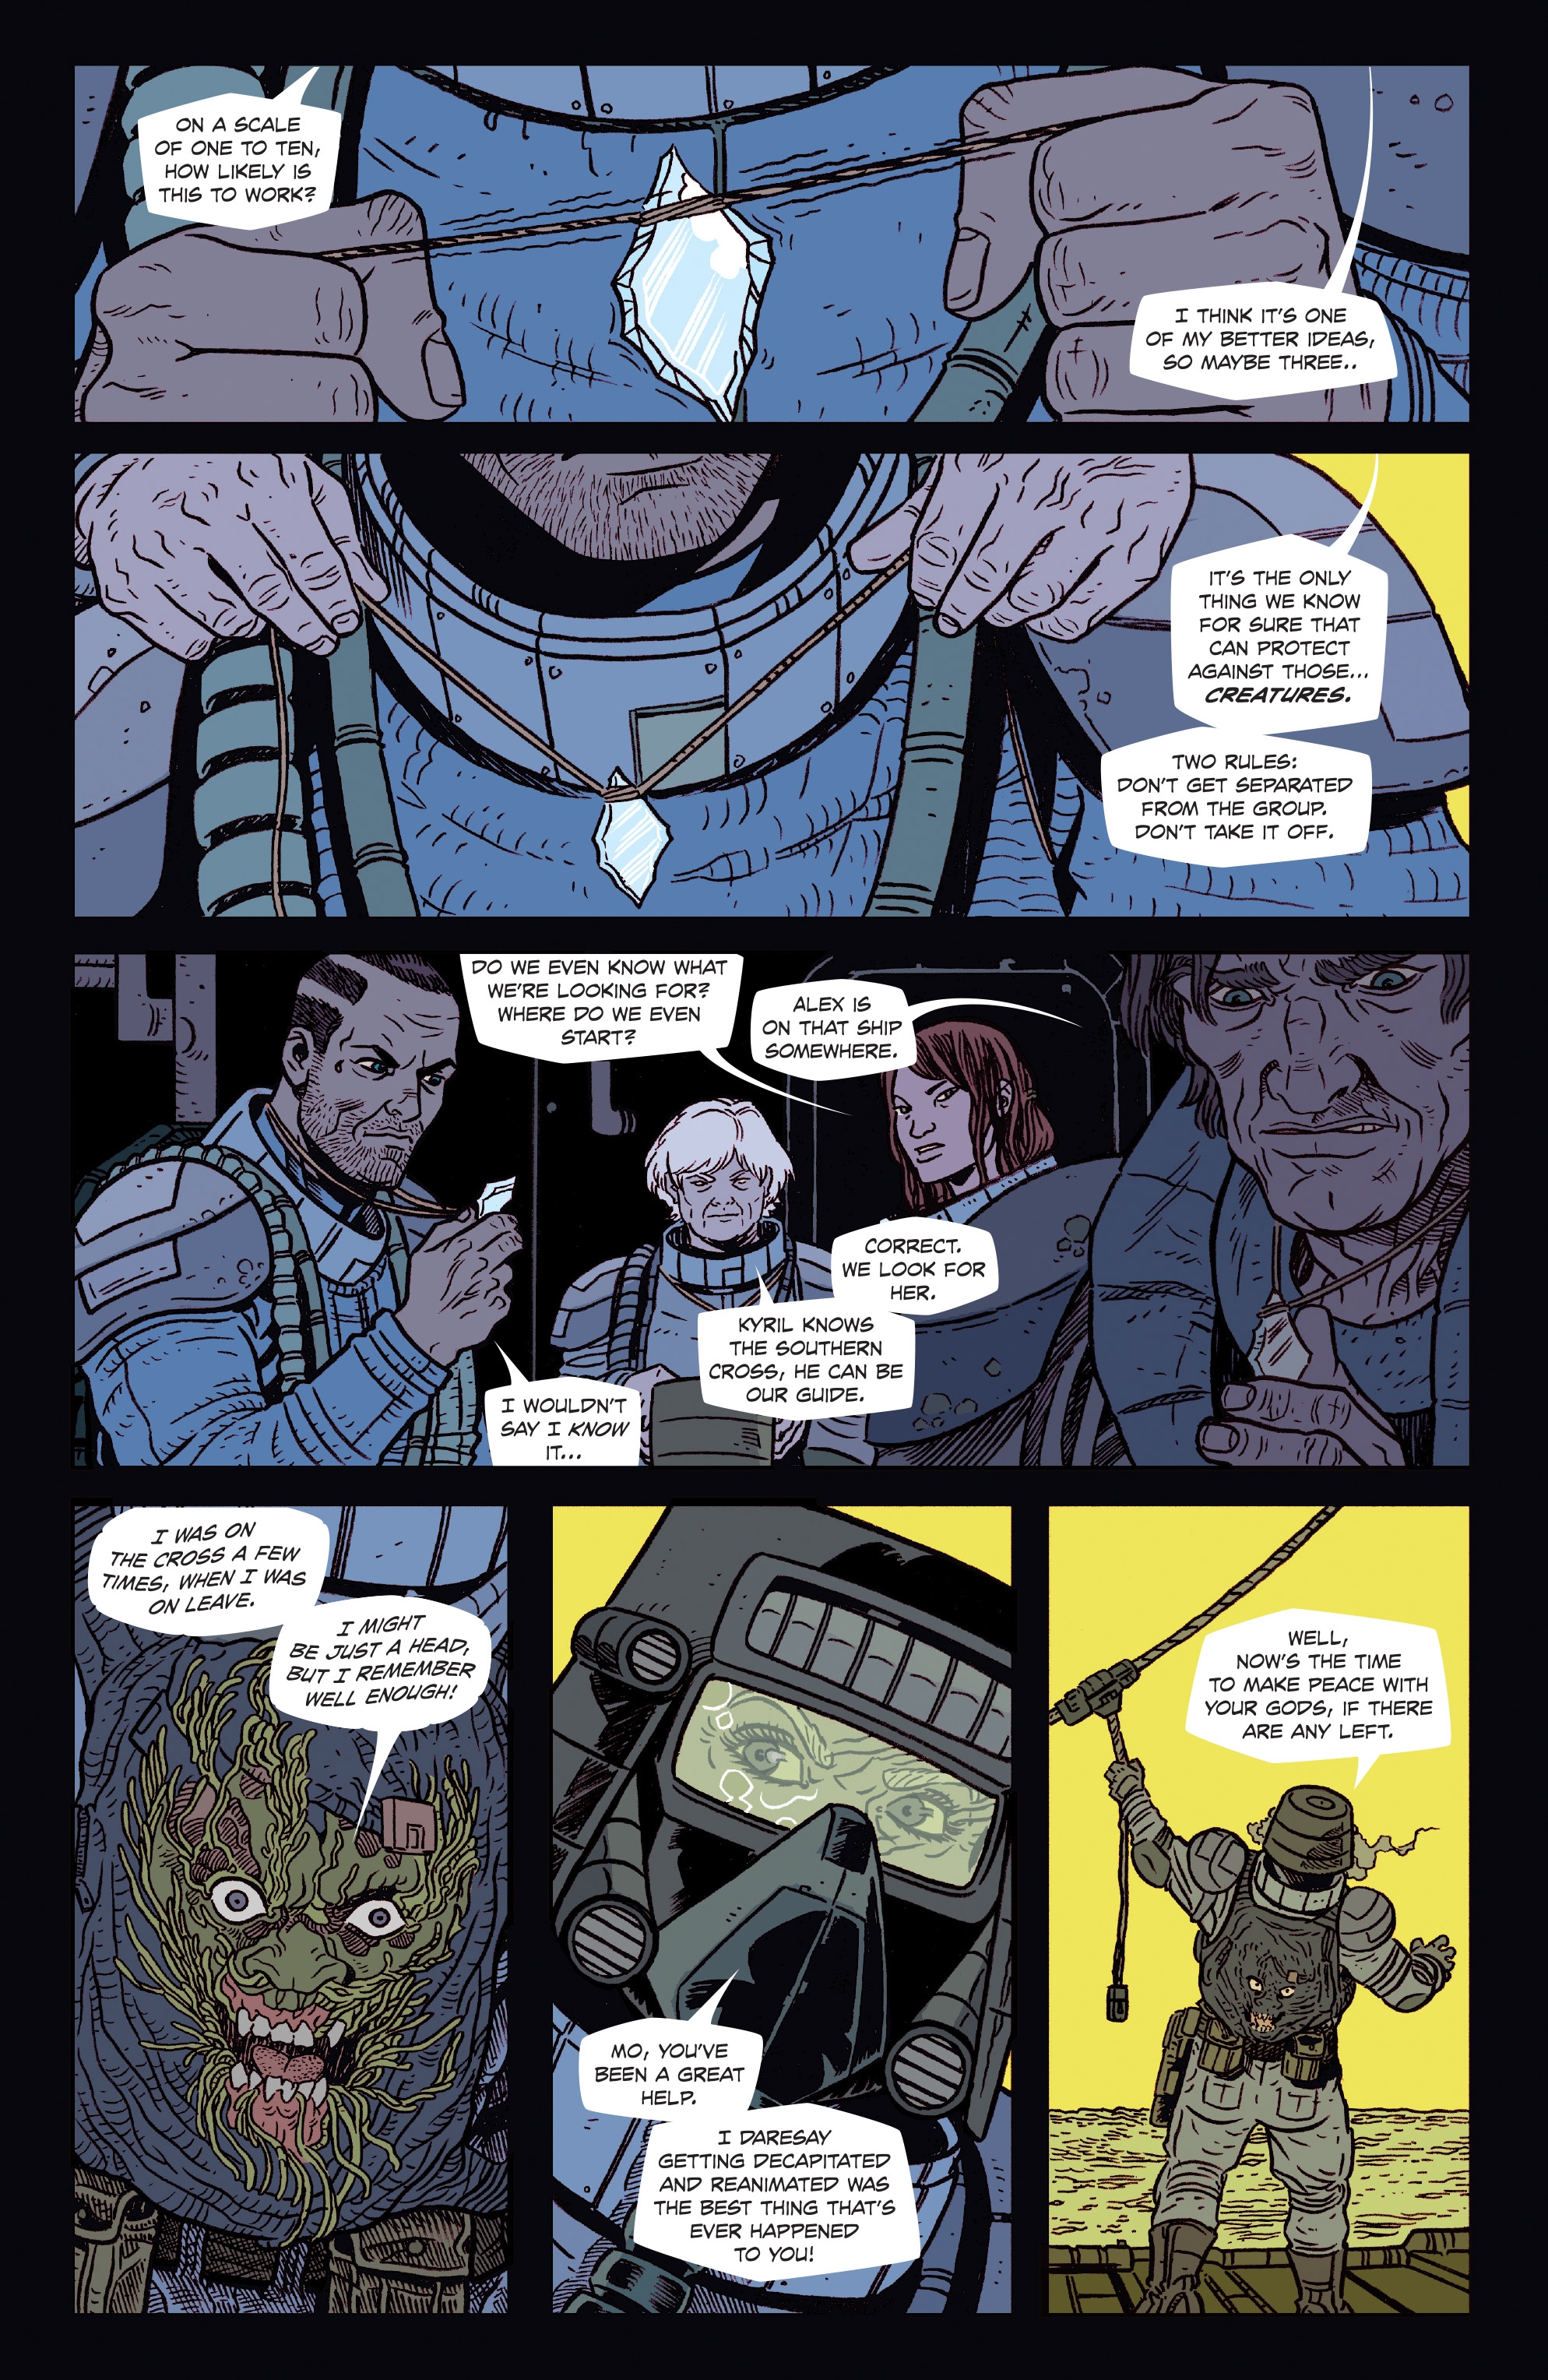 Southern Cross (2015-): Chapter 13 - Page 3